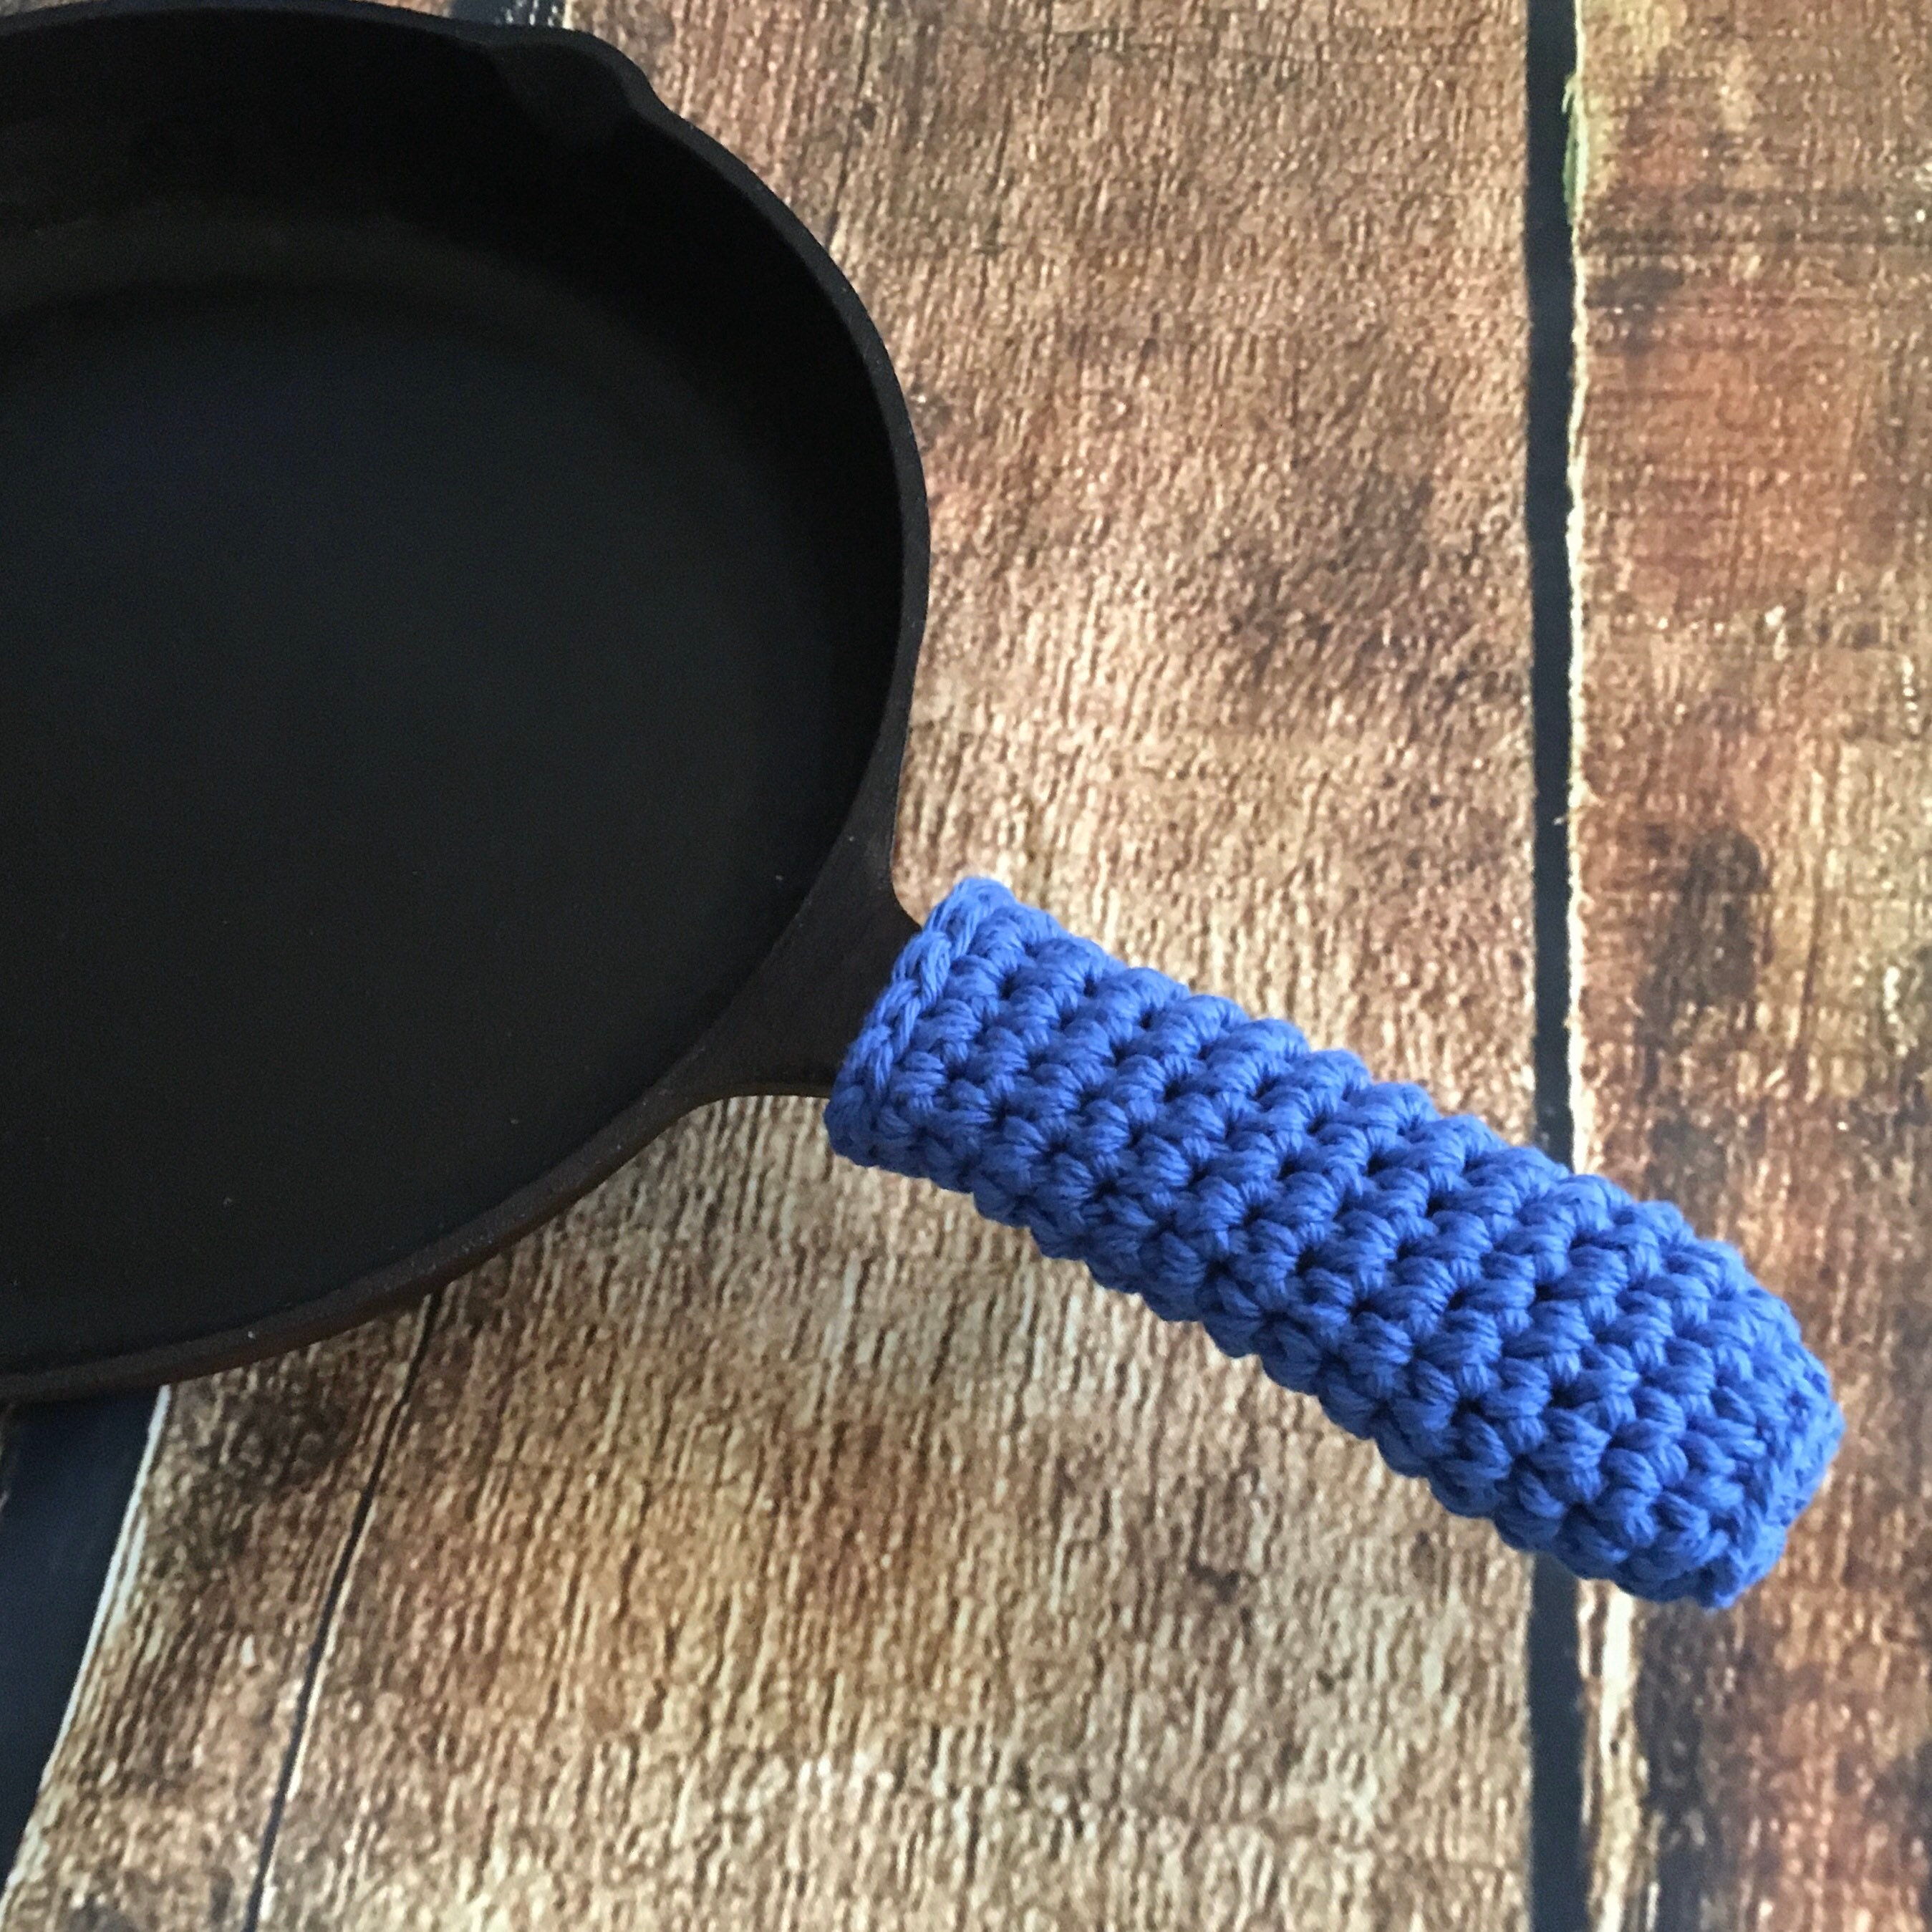 FREE Cast Iron Handle Cover: Crochet pattern